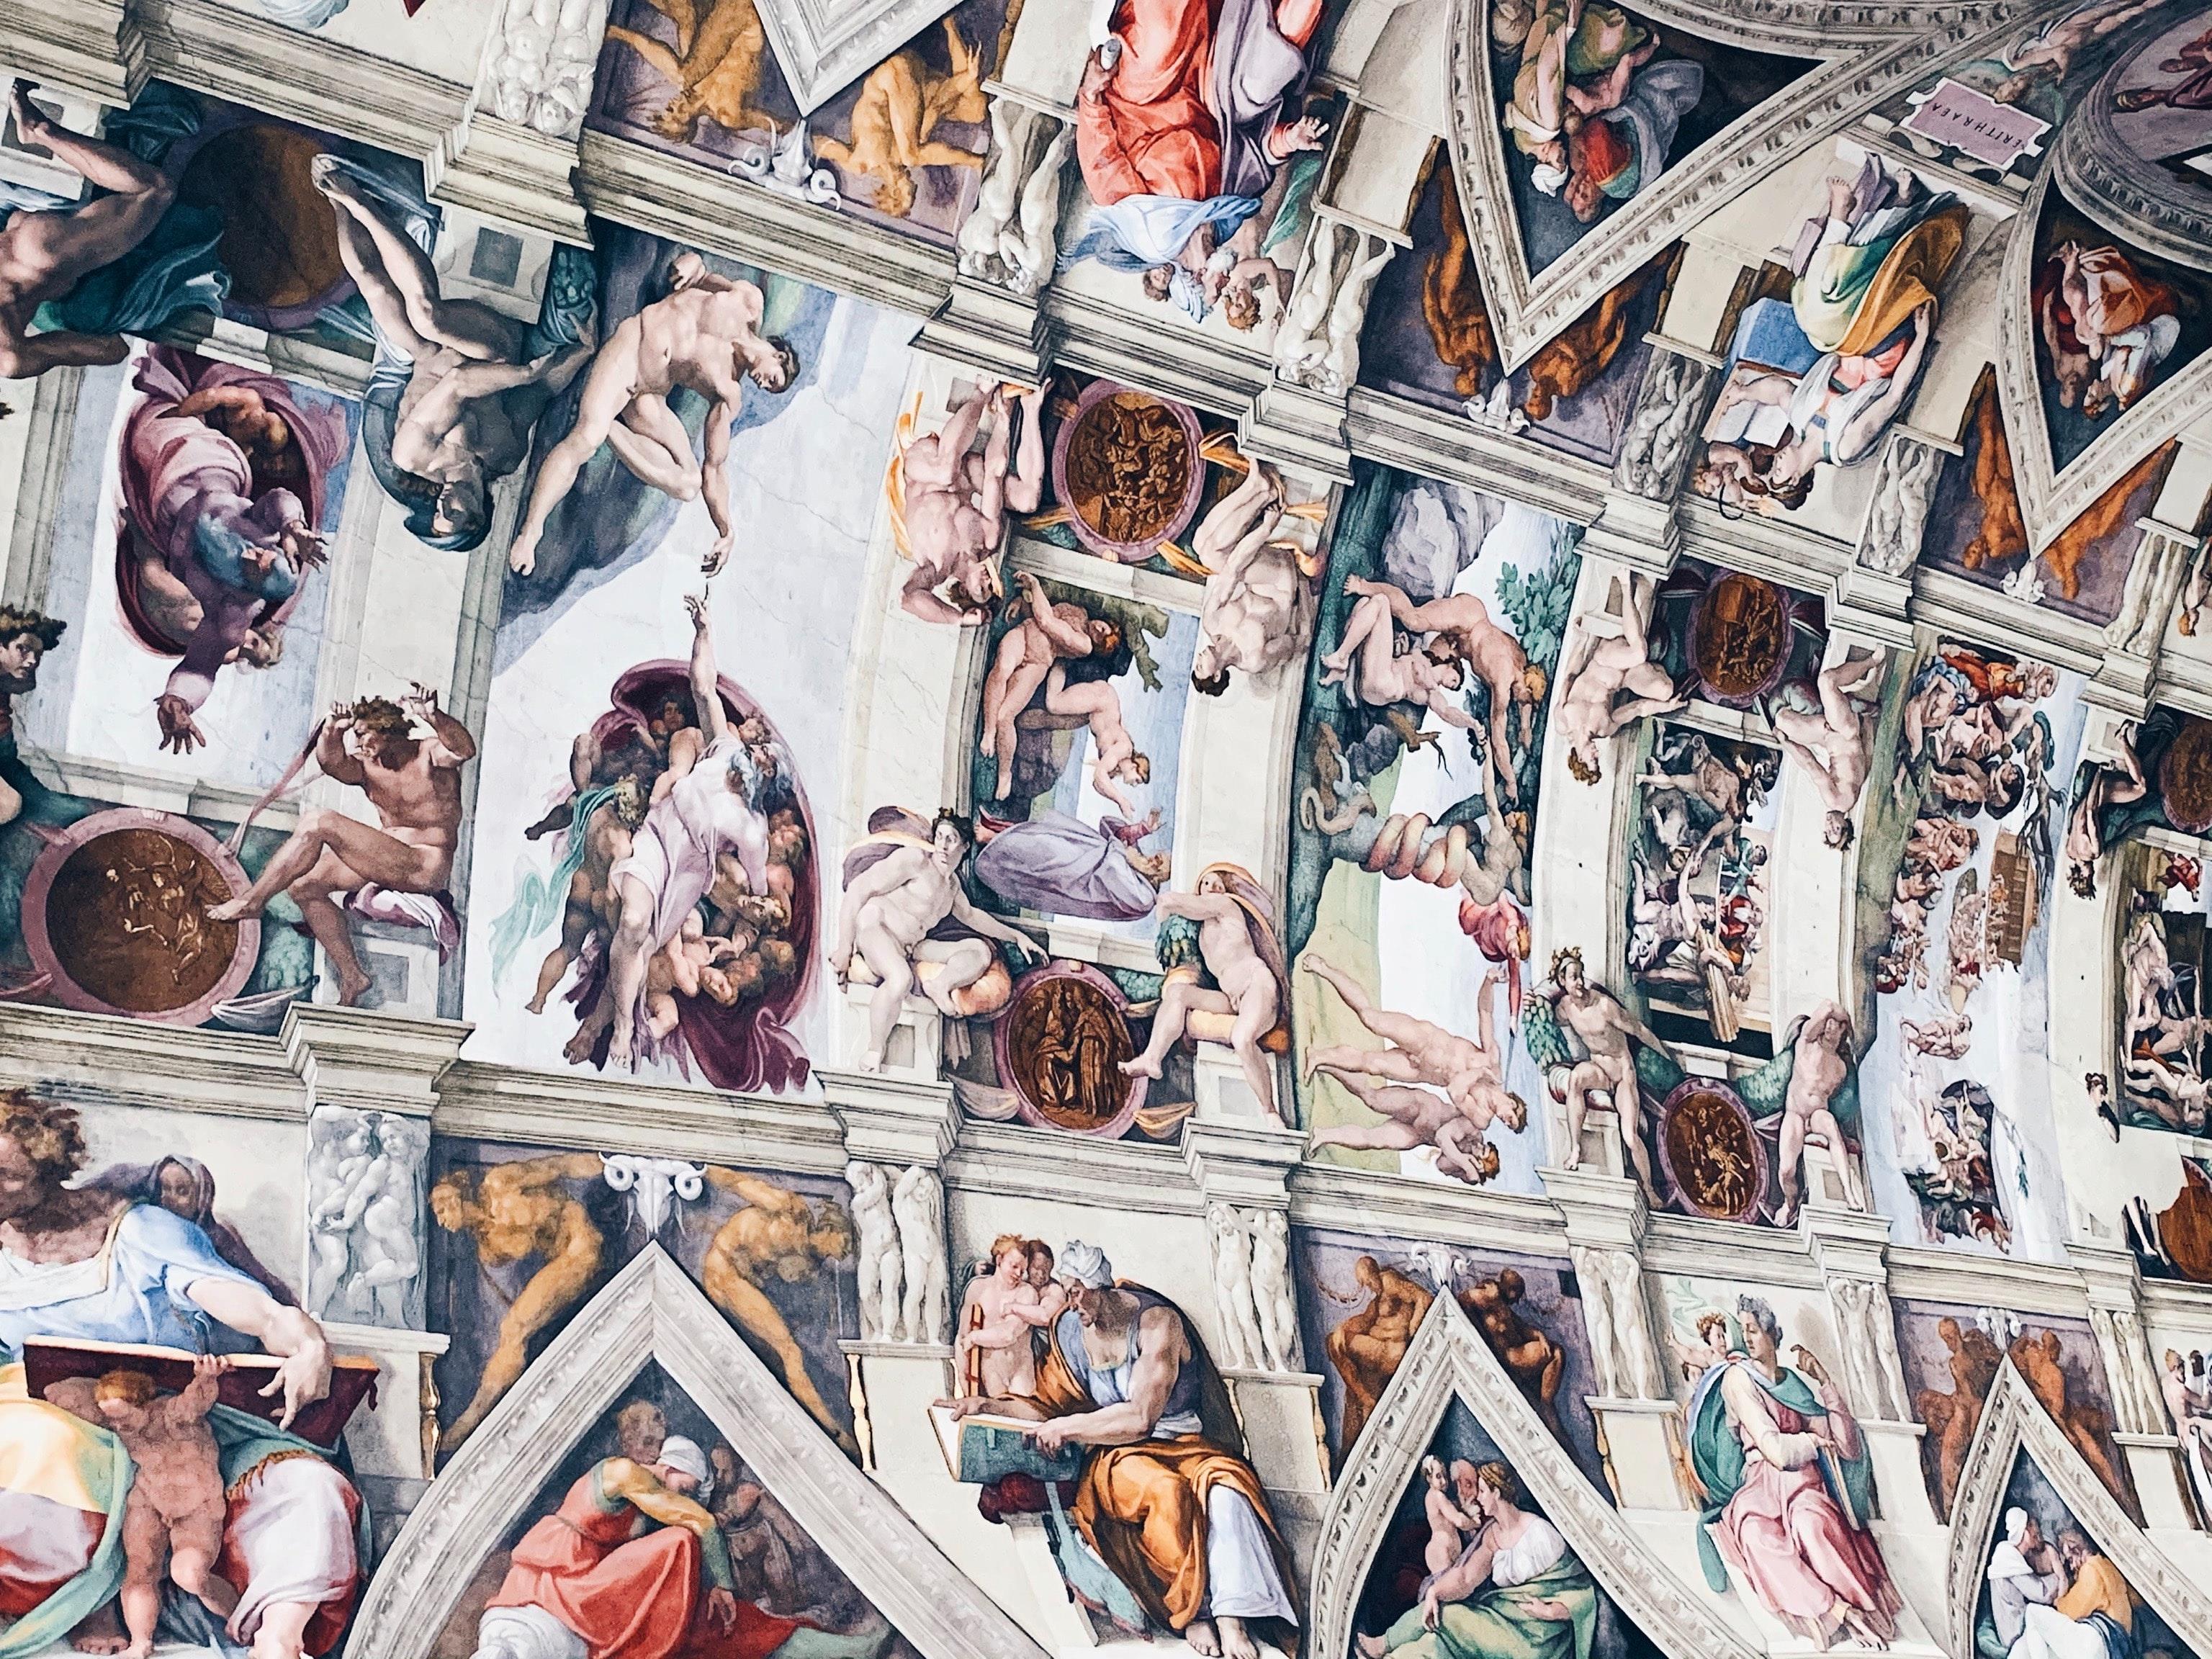 guided-tour-vatican-museums-and-sistine-chapel-6